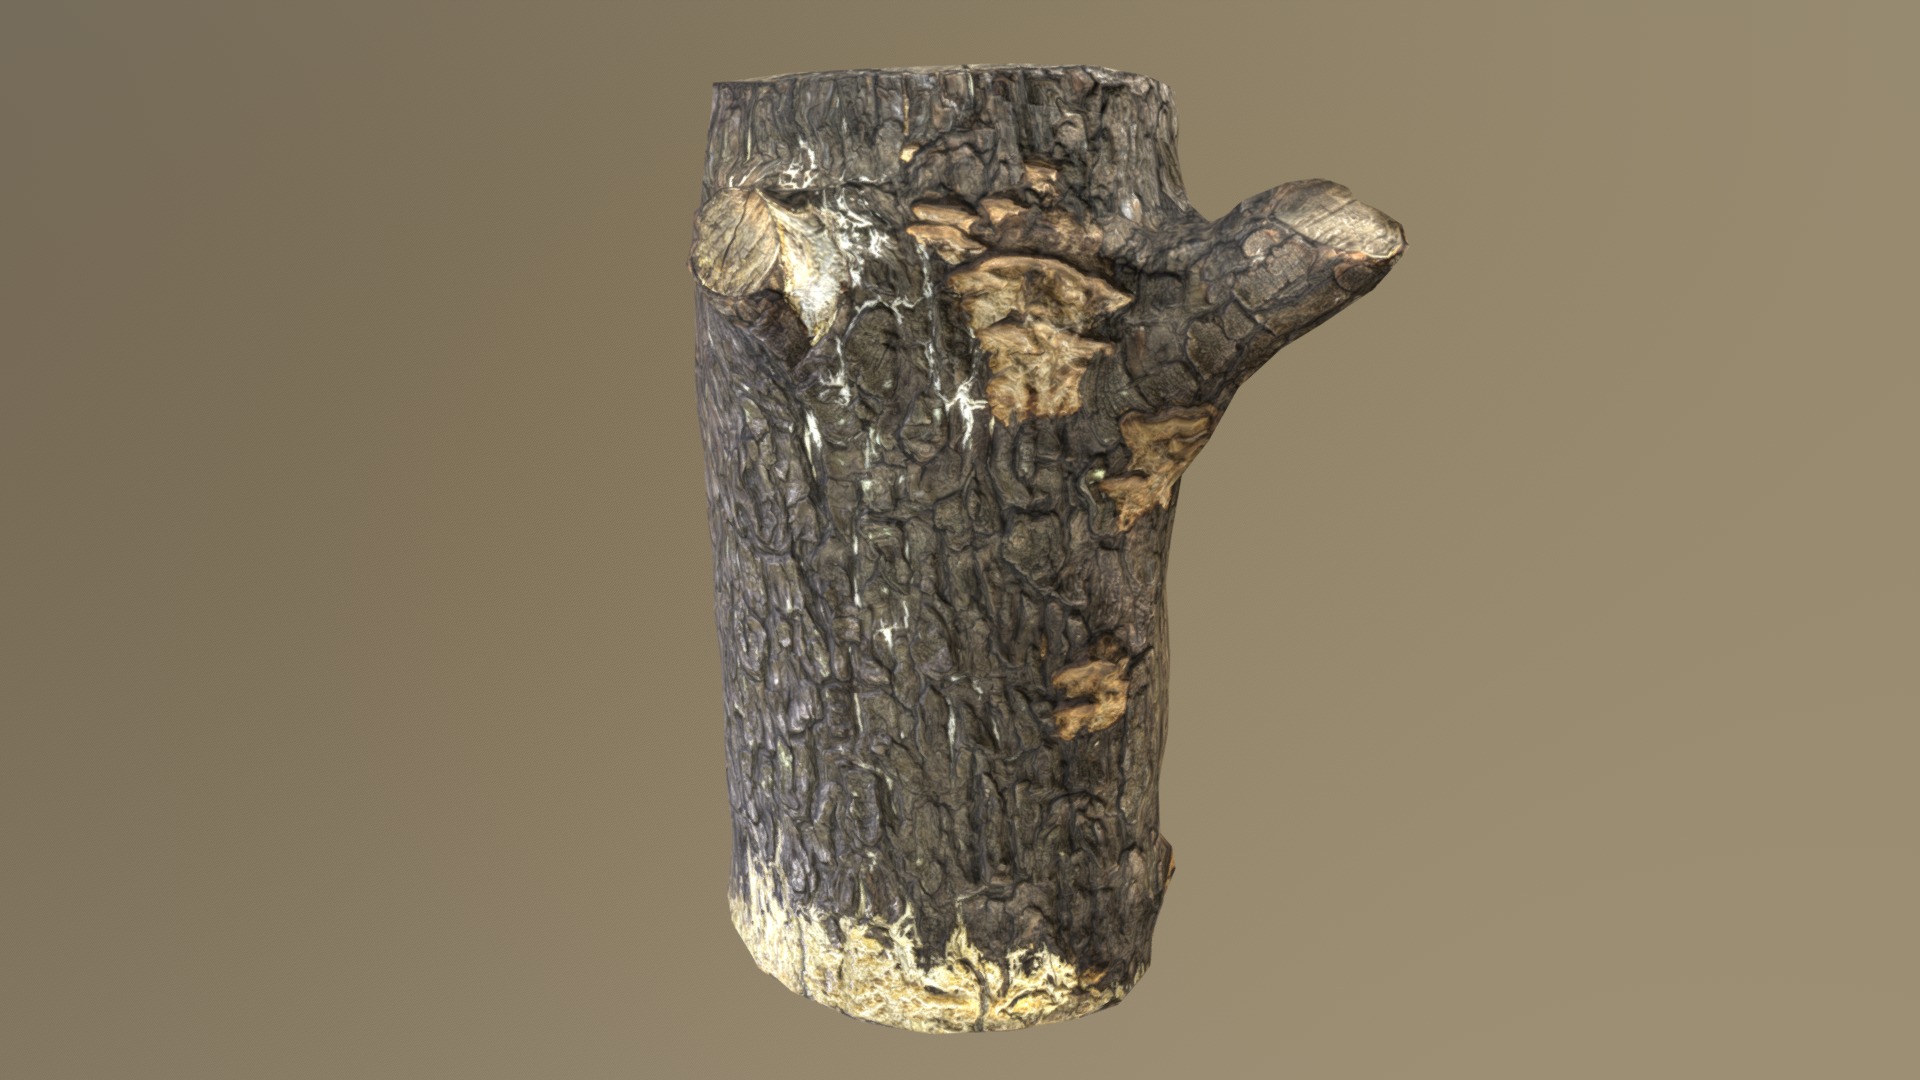 3D model Stump02 - This is a 3D model of the Stump02. The 3D model is about a close-up of a glass bottle.